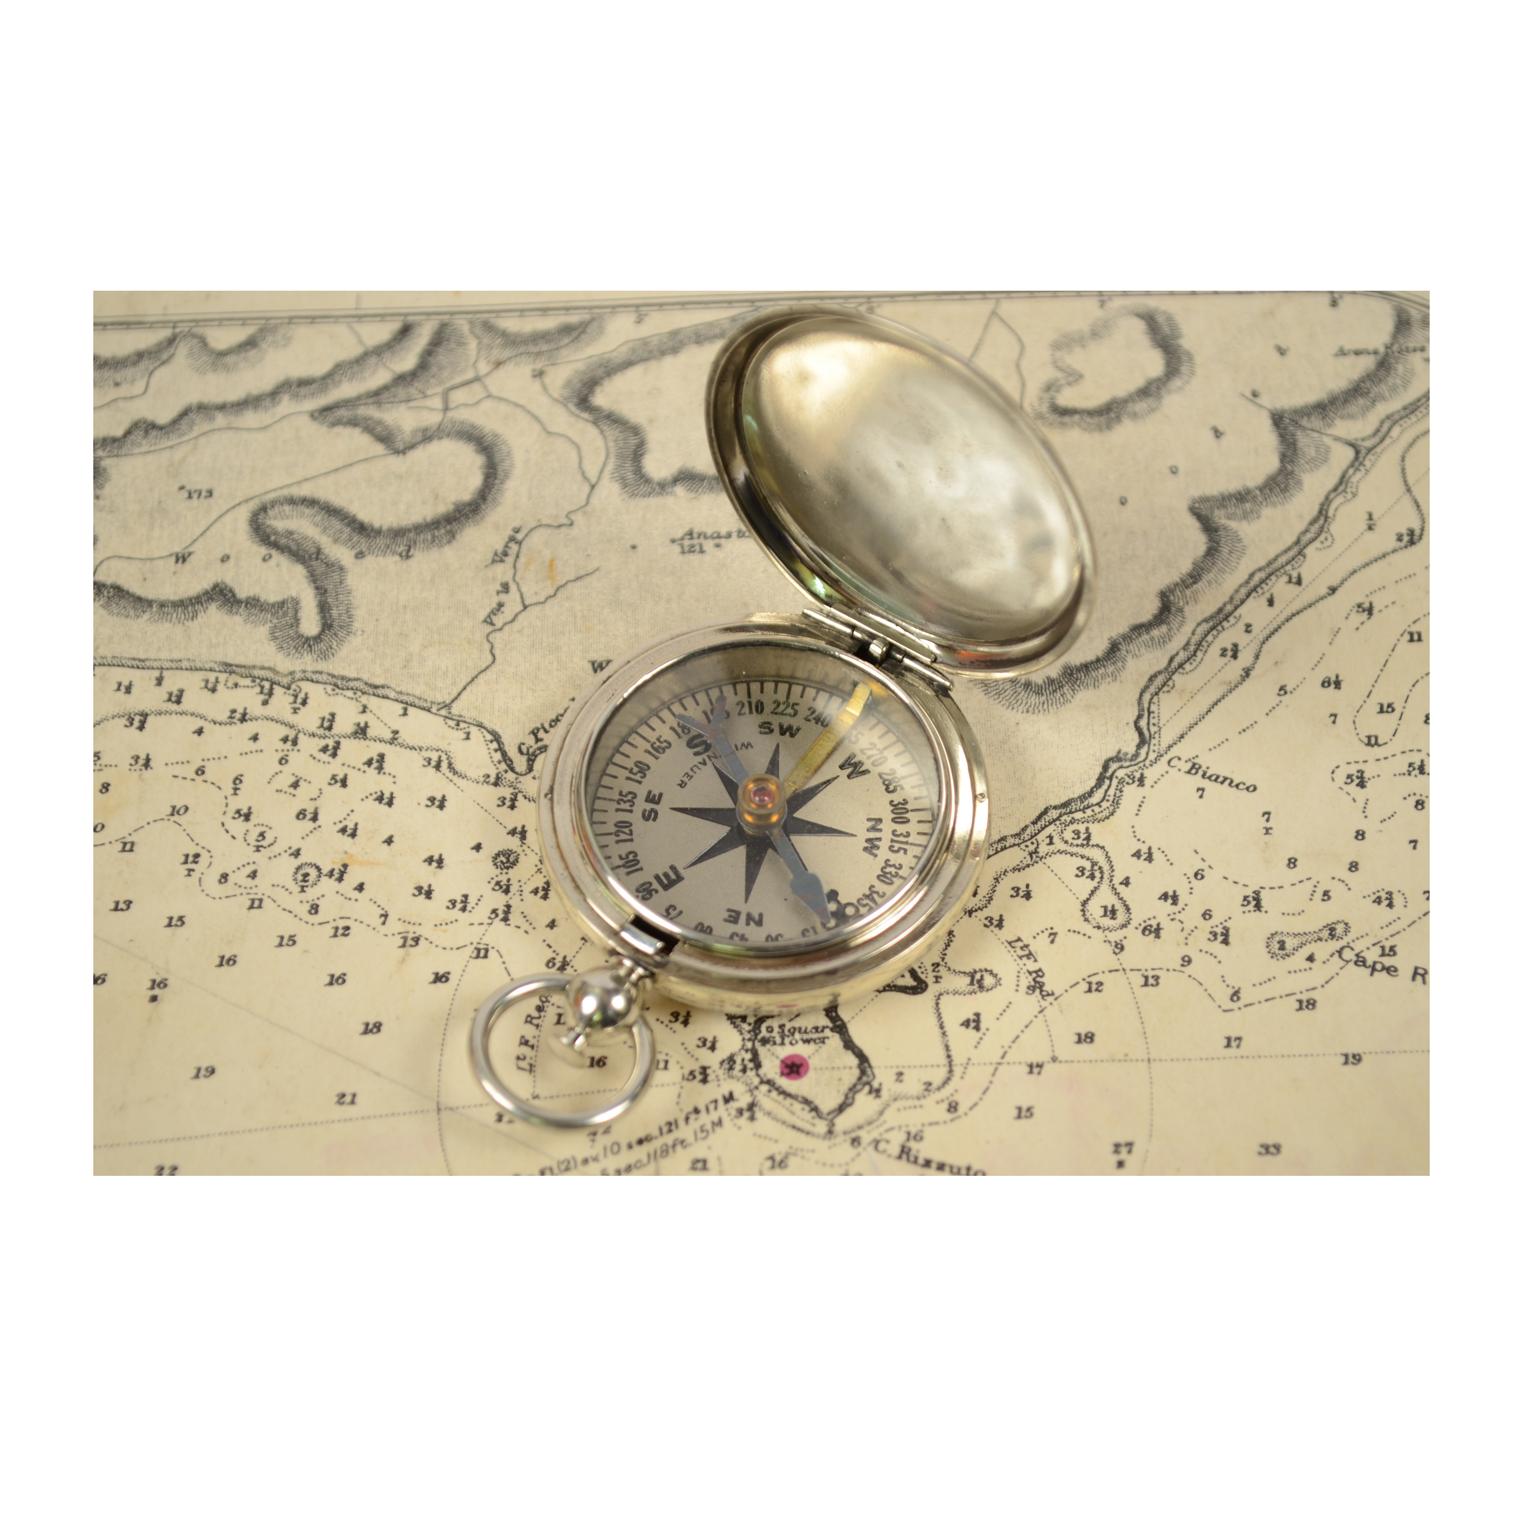 Pocket compass used by the American aviation officers in the 1920s, made of chromed brass in the shape of an pocket watch, signed Wittnauer; on the lower part engraved with MFR's PART N° K1626-2, and U.S. on the cover. The compass has a snap-on